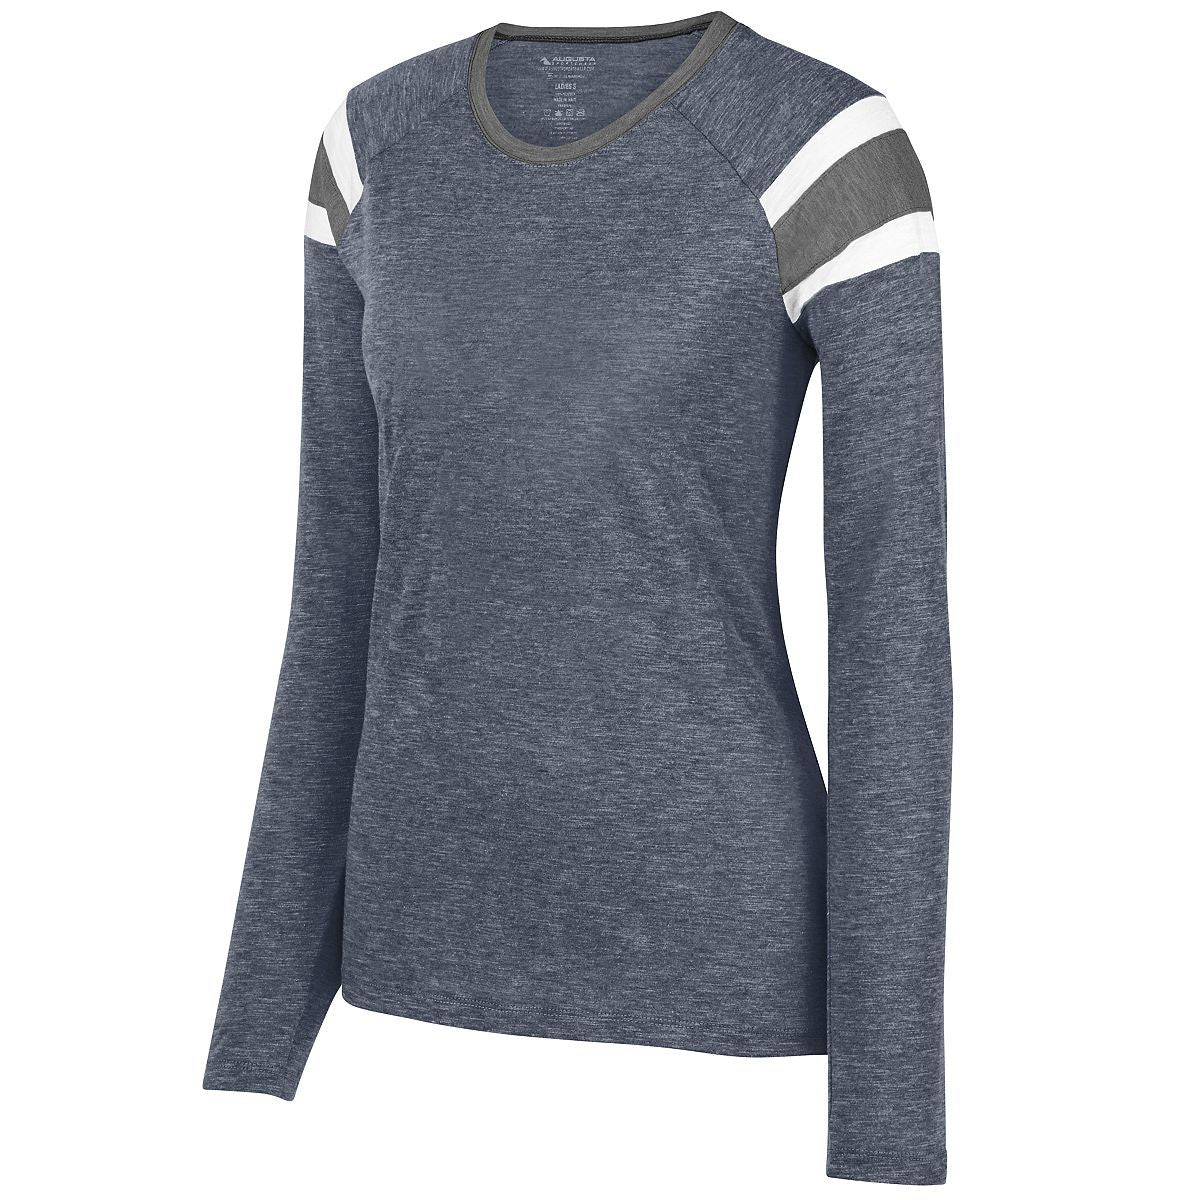 Augusta Sportswear Ladies Long Sleeve Fanatic Tee in Navy/Slate/White  -Part of the Ladies, Ladies-Tee-Shirt, T-Shirts, Augusta-Products, Shirts product lines at KanaleyCreations.com